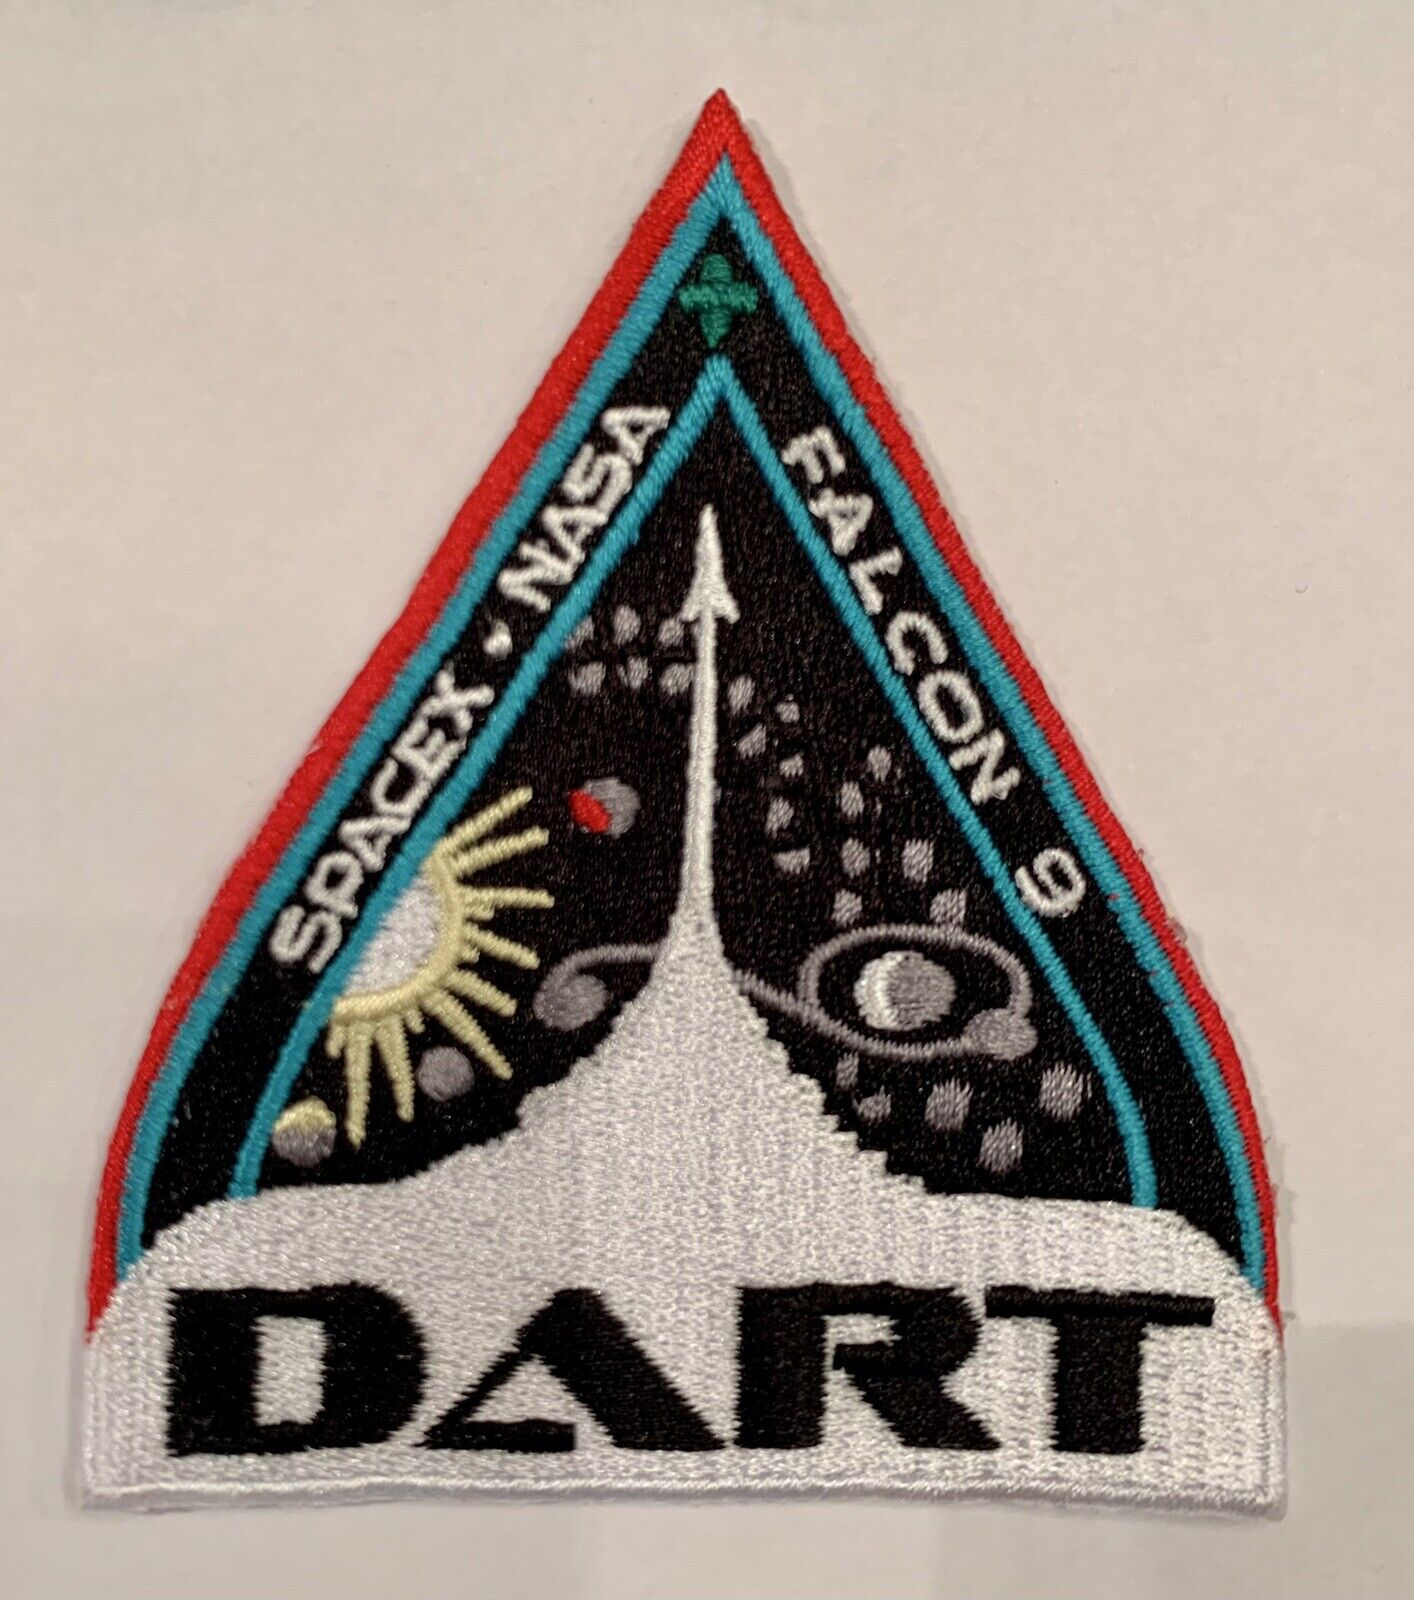 Original SPACEX DART Mission EMBROIDERED PATCH 3.5” Falcon 9